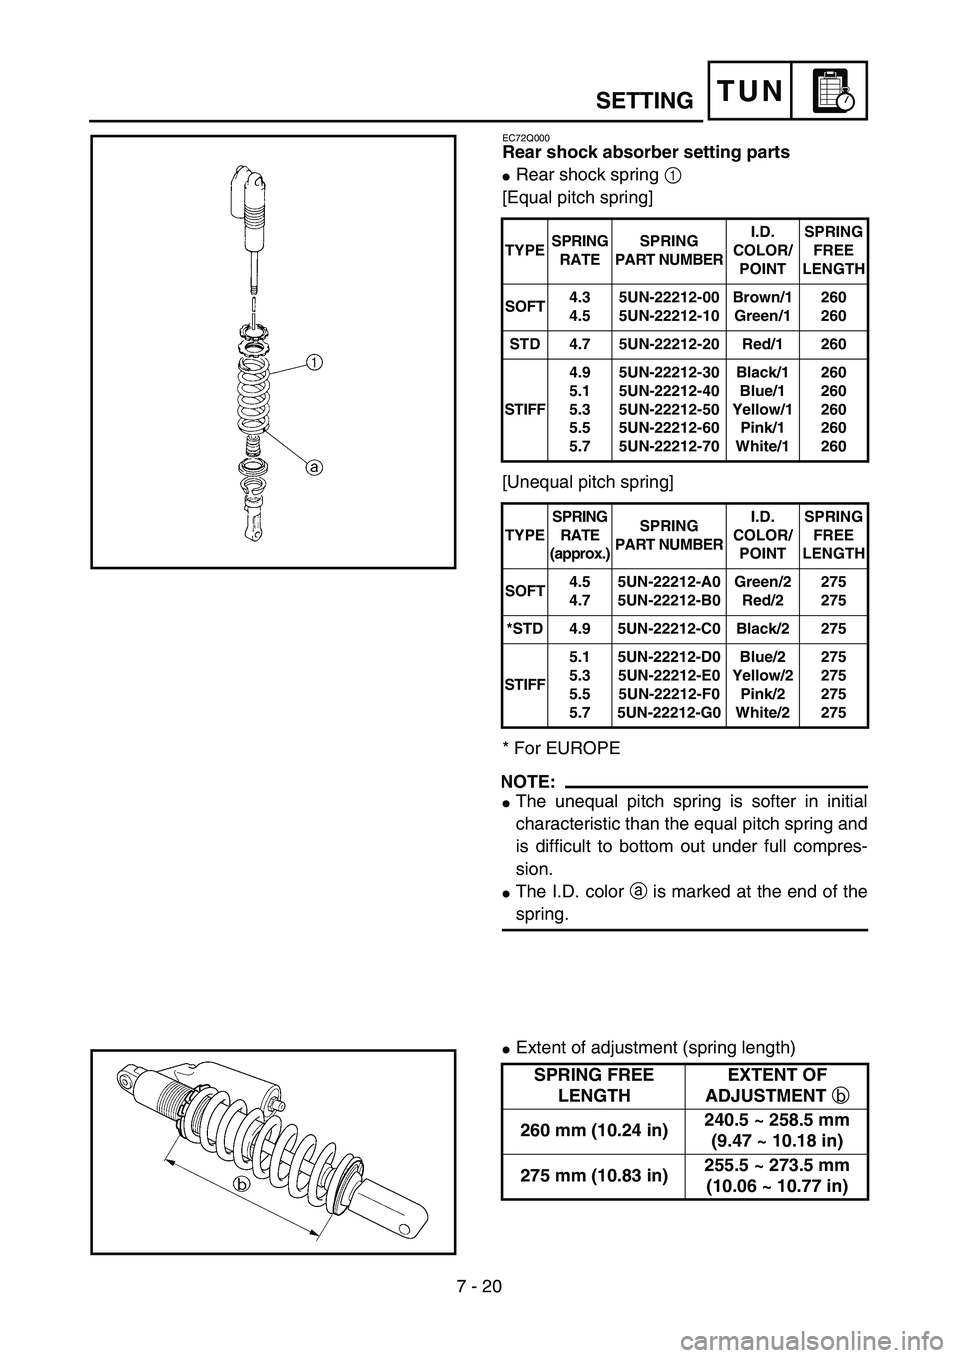 YAMAHA YZ250F 2003  Notices Demploi (in French) 7 - 20
TUNSETTING
EC72Q000
Rear shock absorber setting parts
Rear shock spring 1 
[Equal pitch spring]
[Unequal pitch spring]
* For EUROPE
NOTE:
The unequal pitch spring is softer in initial
charact